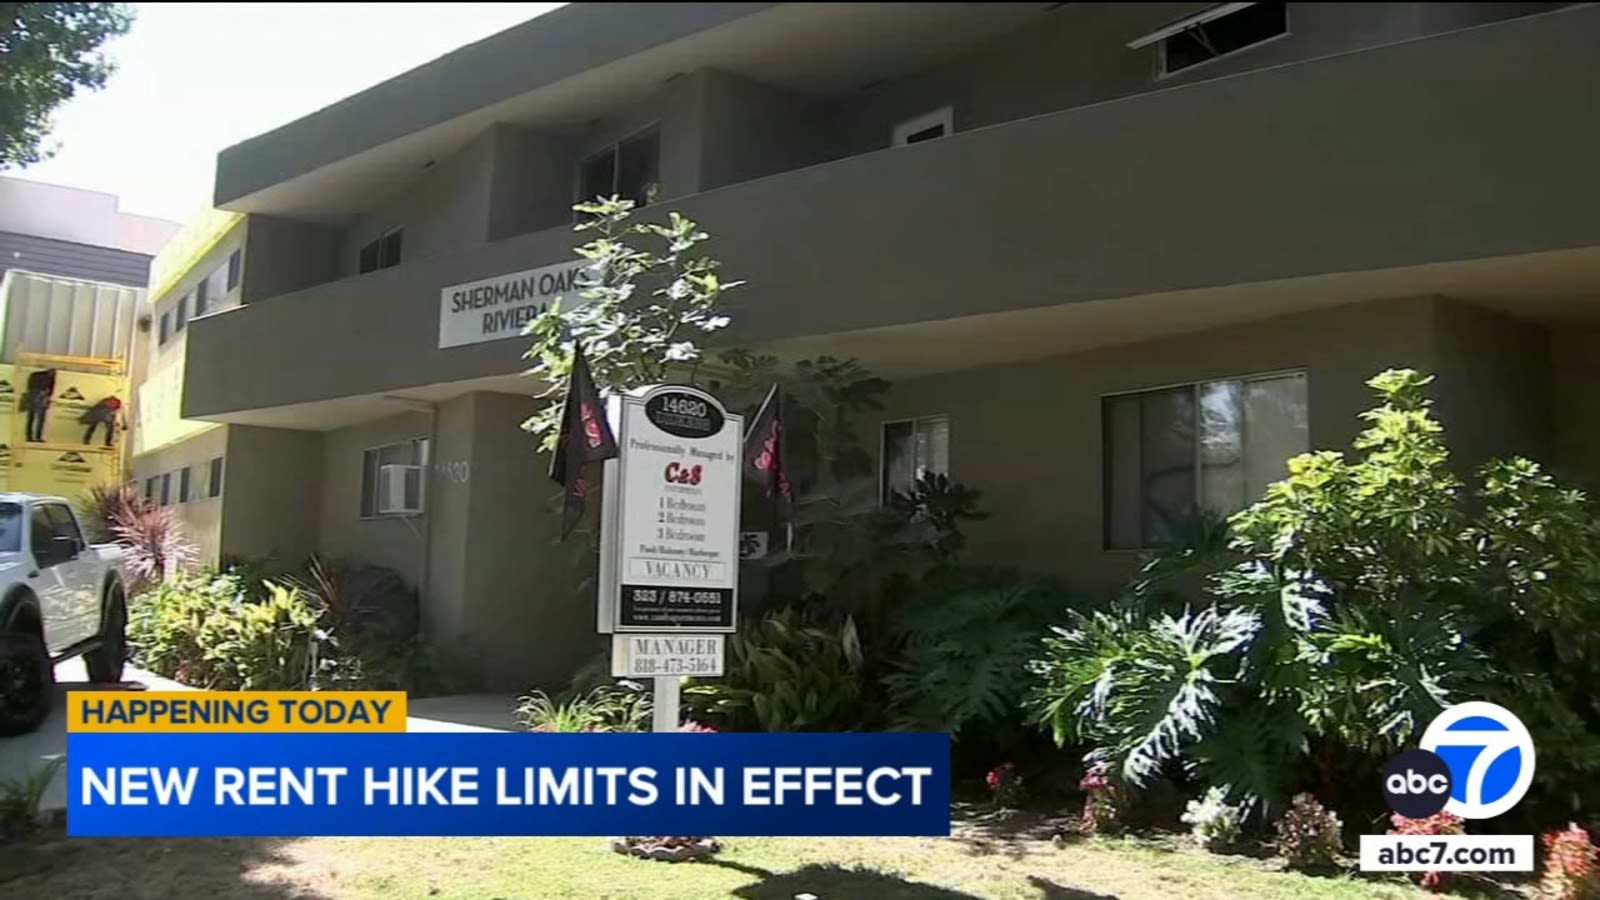 New limit on rent increases goes into effect today in LA, Orange counties - What you need to know